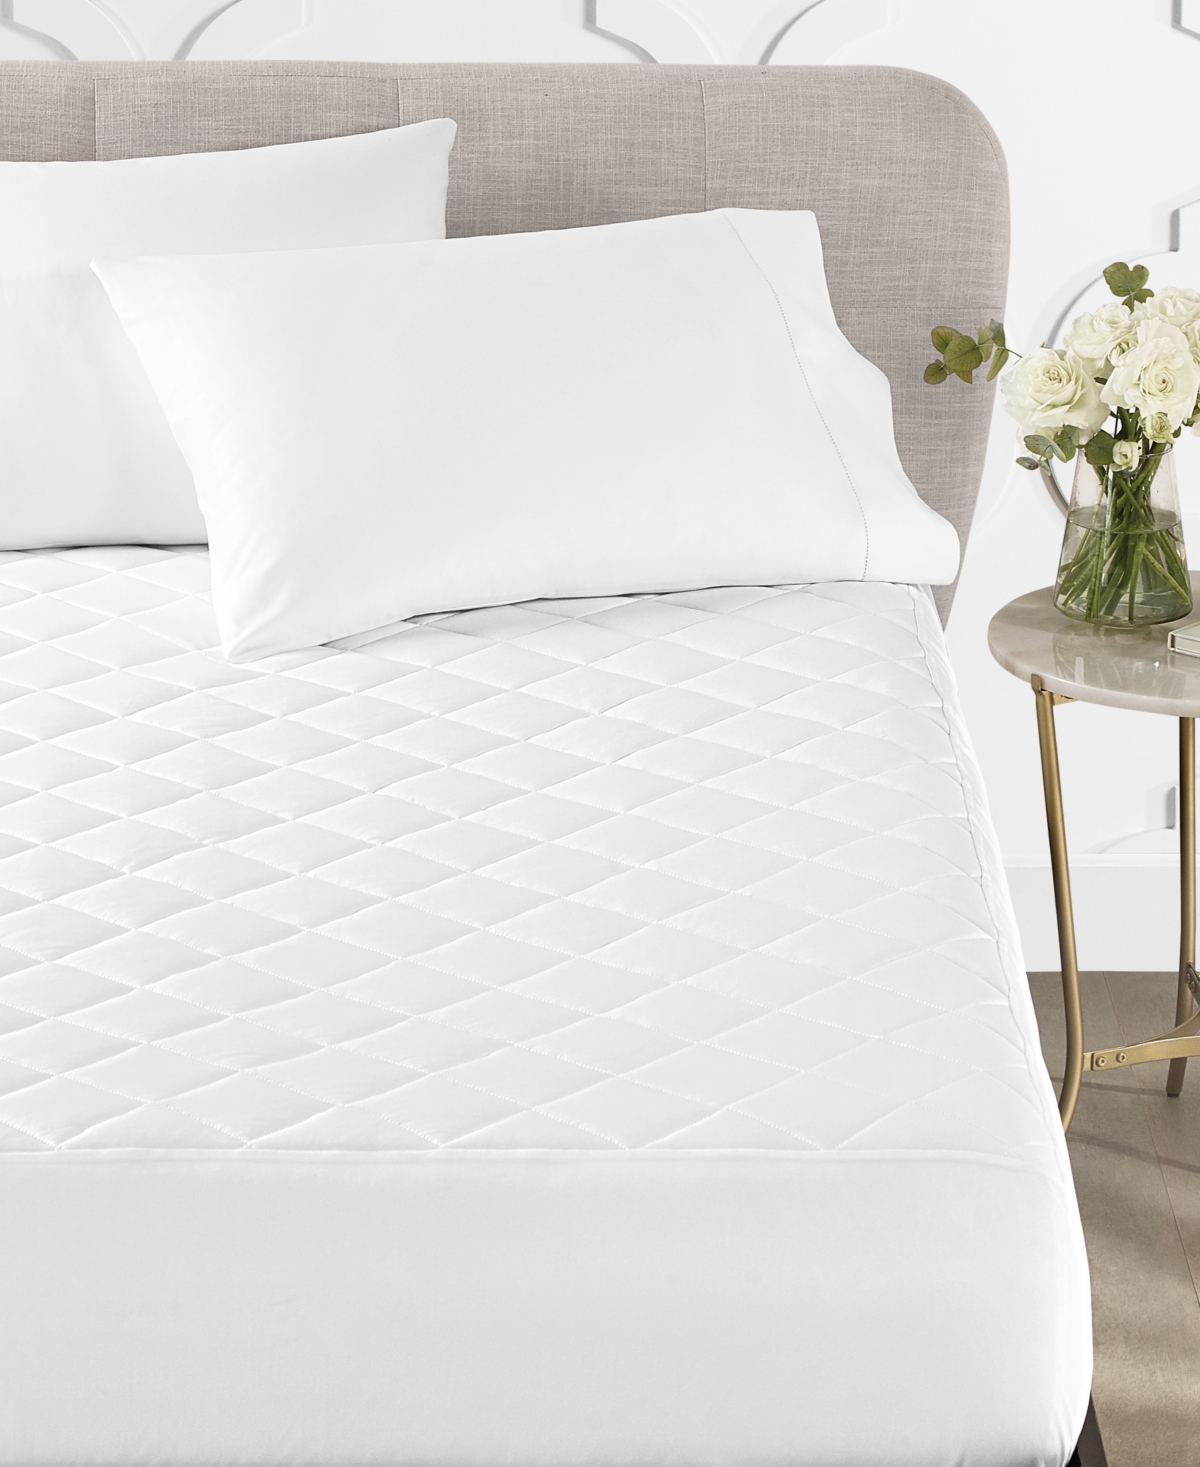 Charter Club Continuous Protection Waterproof Mattress Pad, Full, Created For Macy's In White